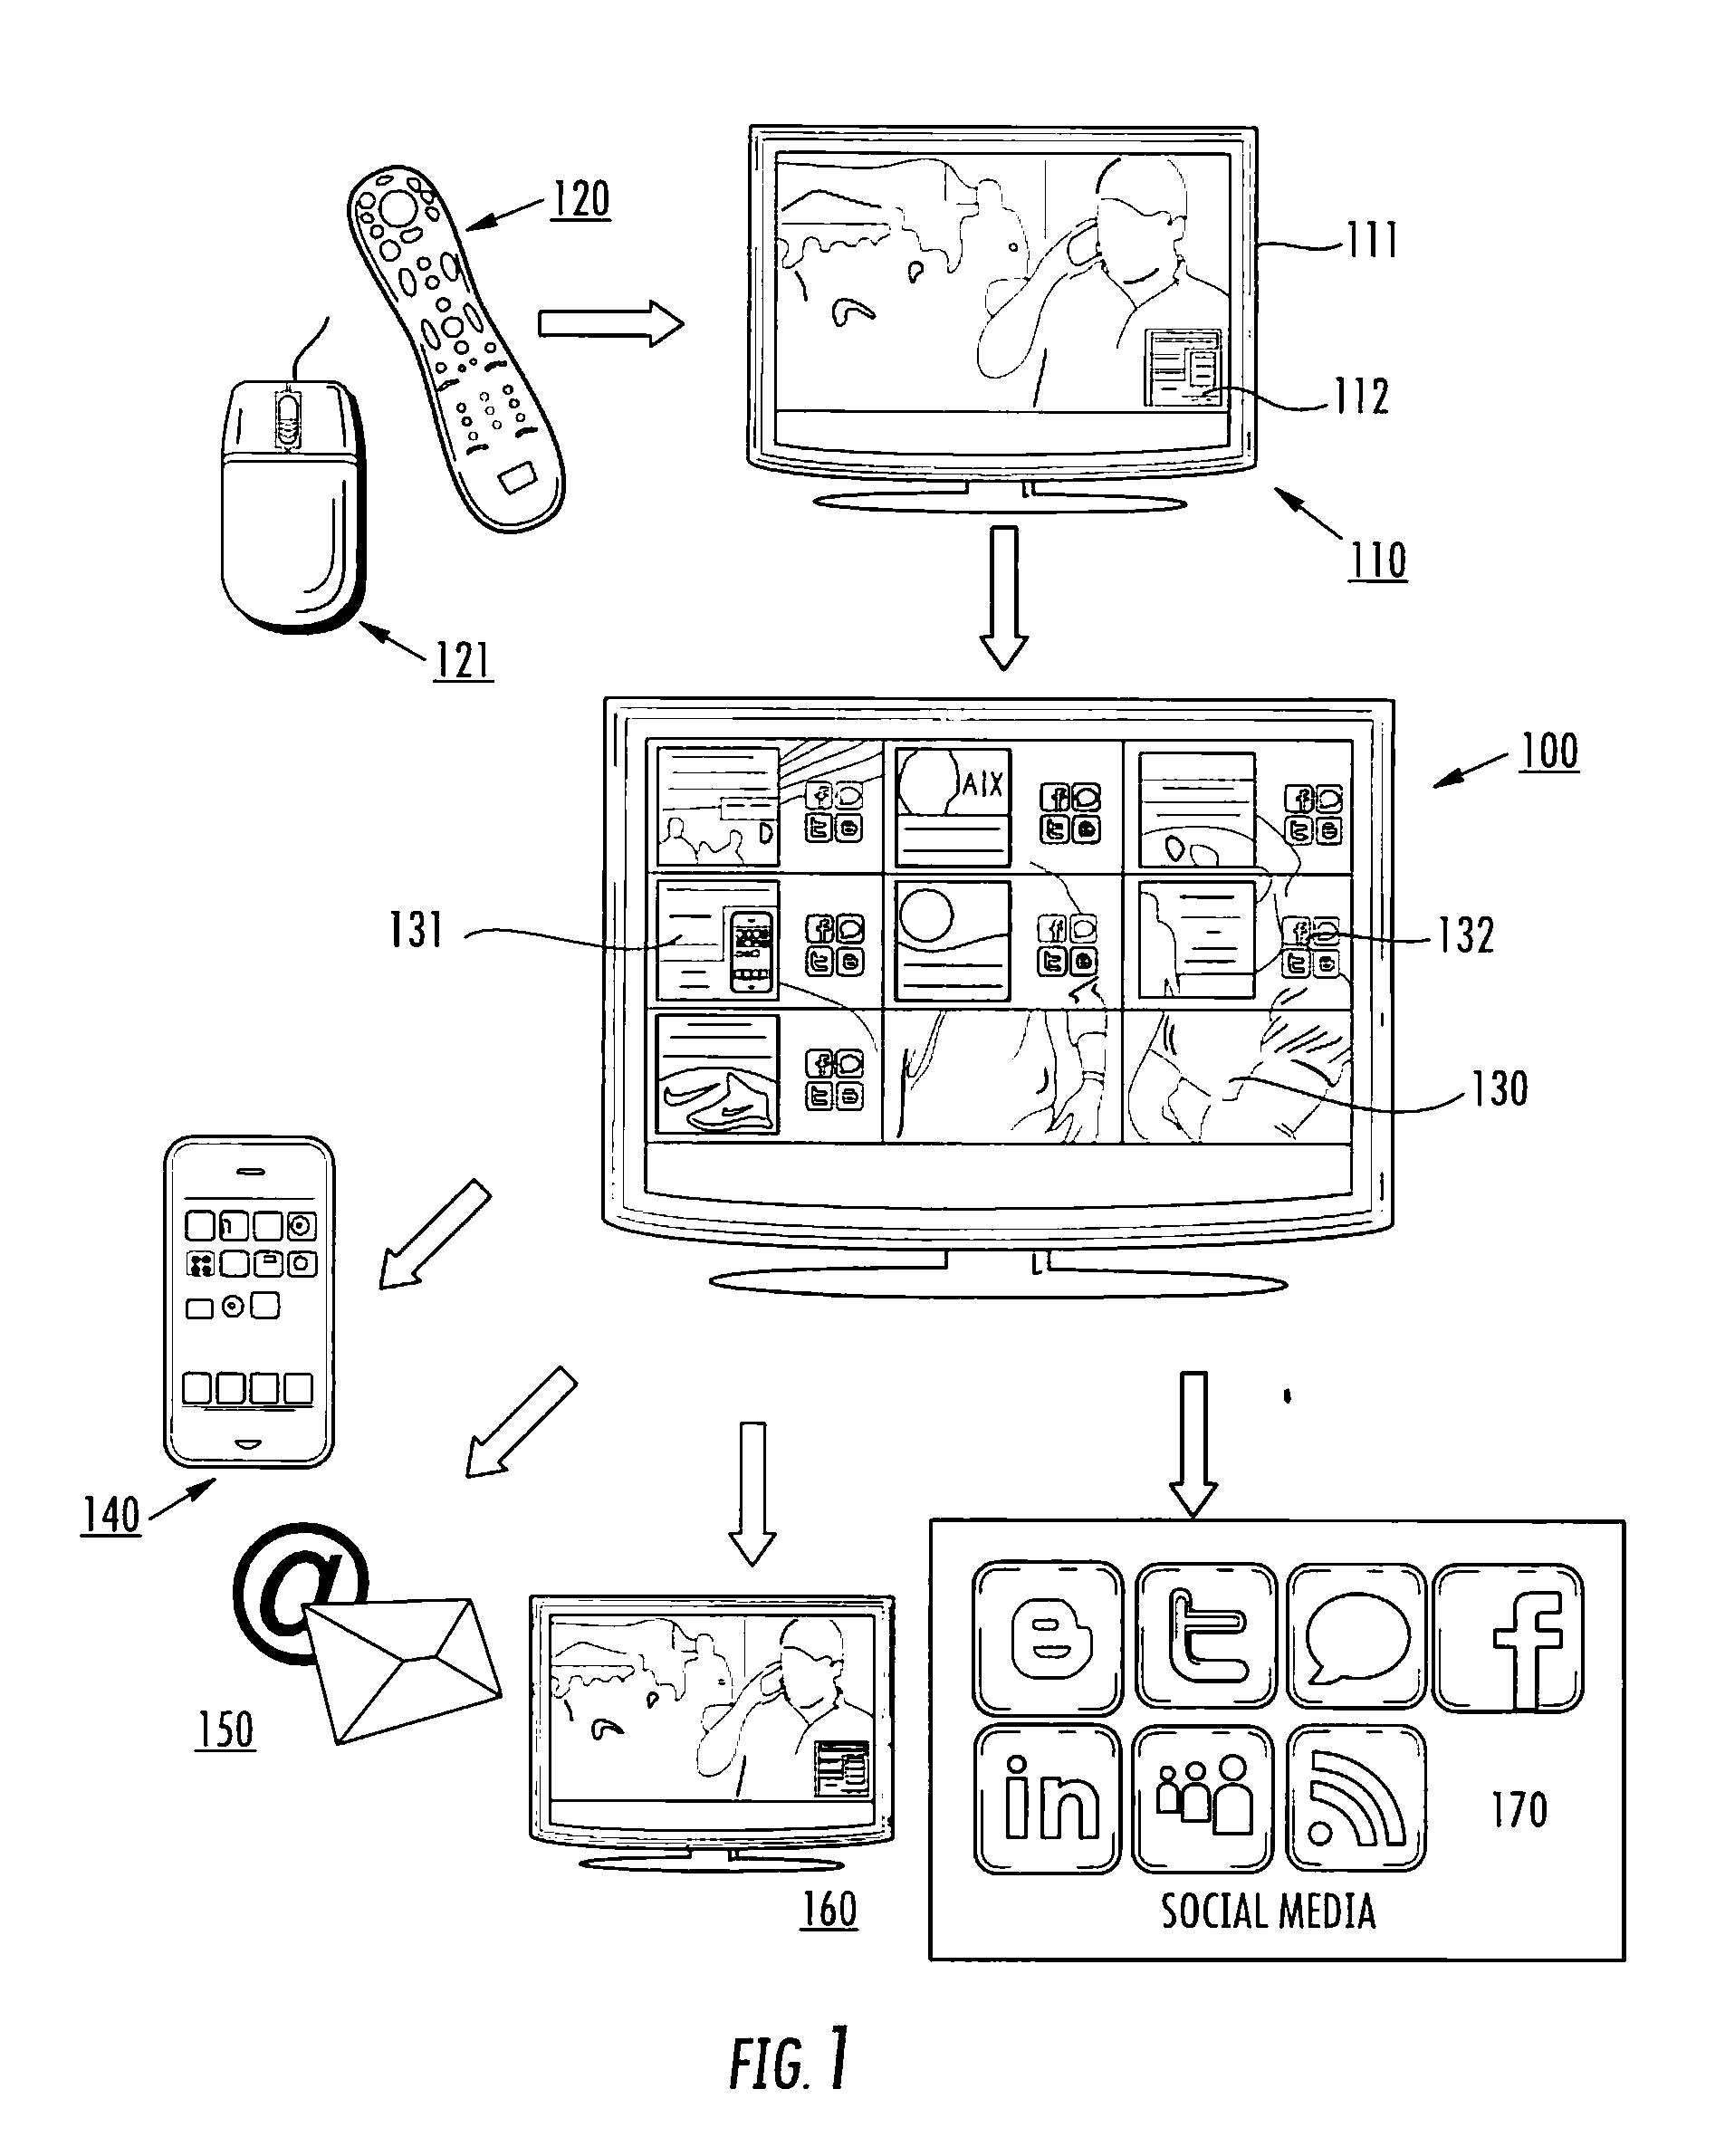 System and Method for Integrating E-Commerce Into Real Time Video Content Advertising